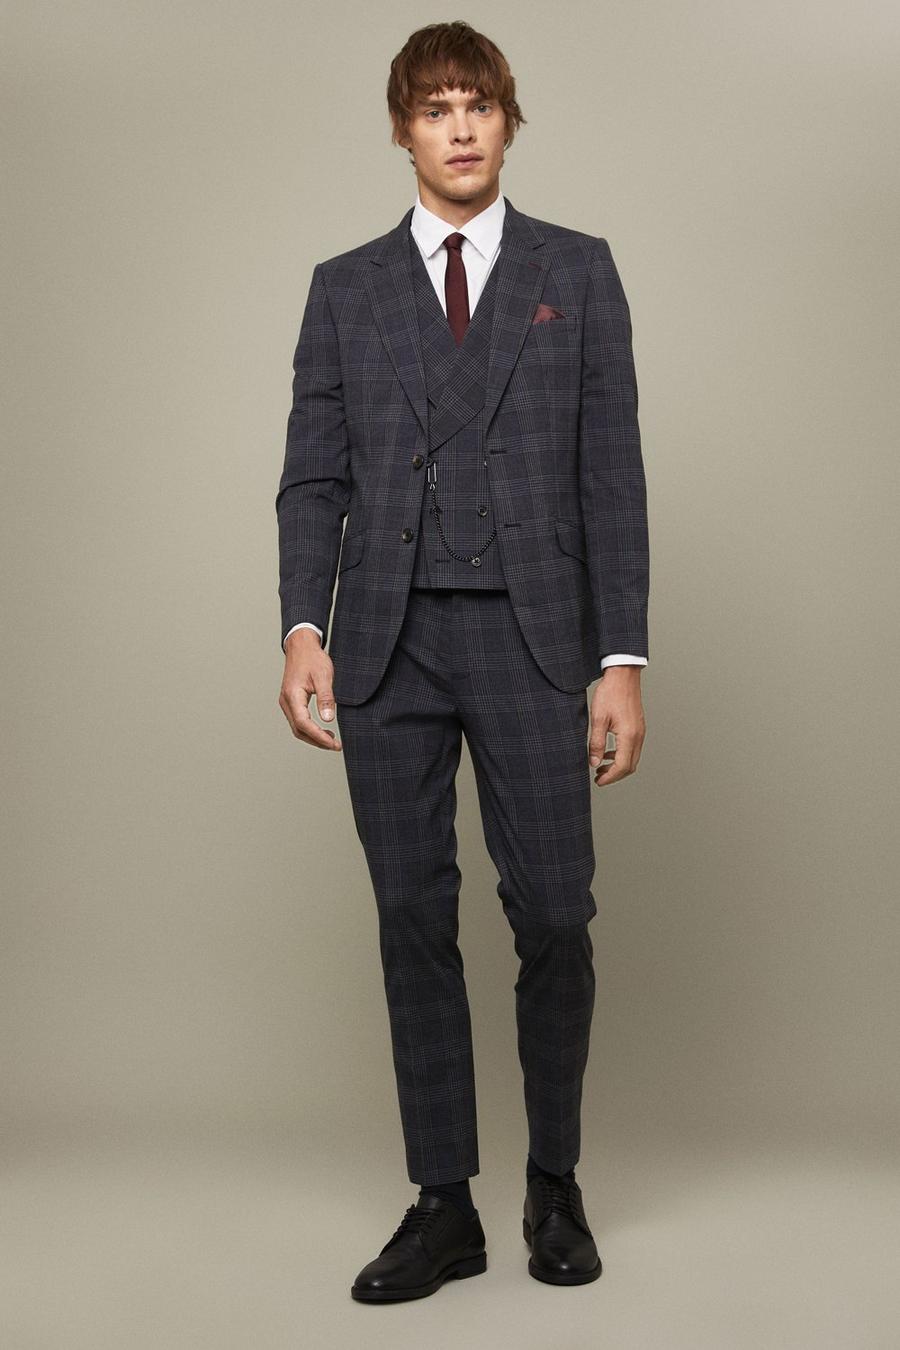 Skinny Fit Grey And Burgundy Retro Check Three-Piece Suit 